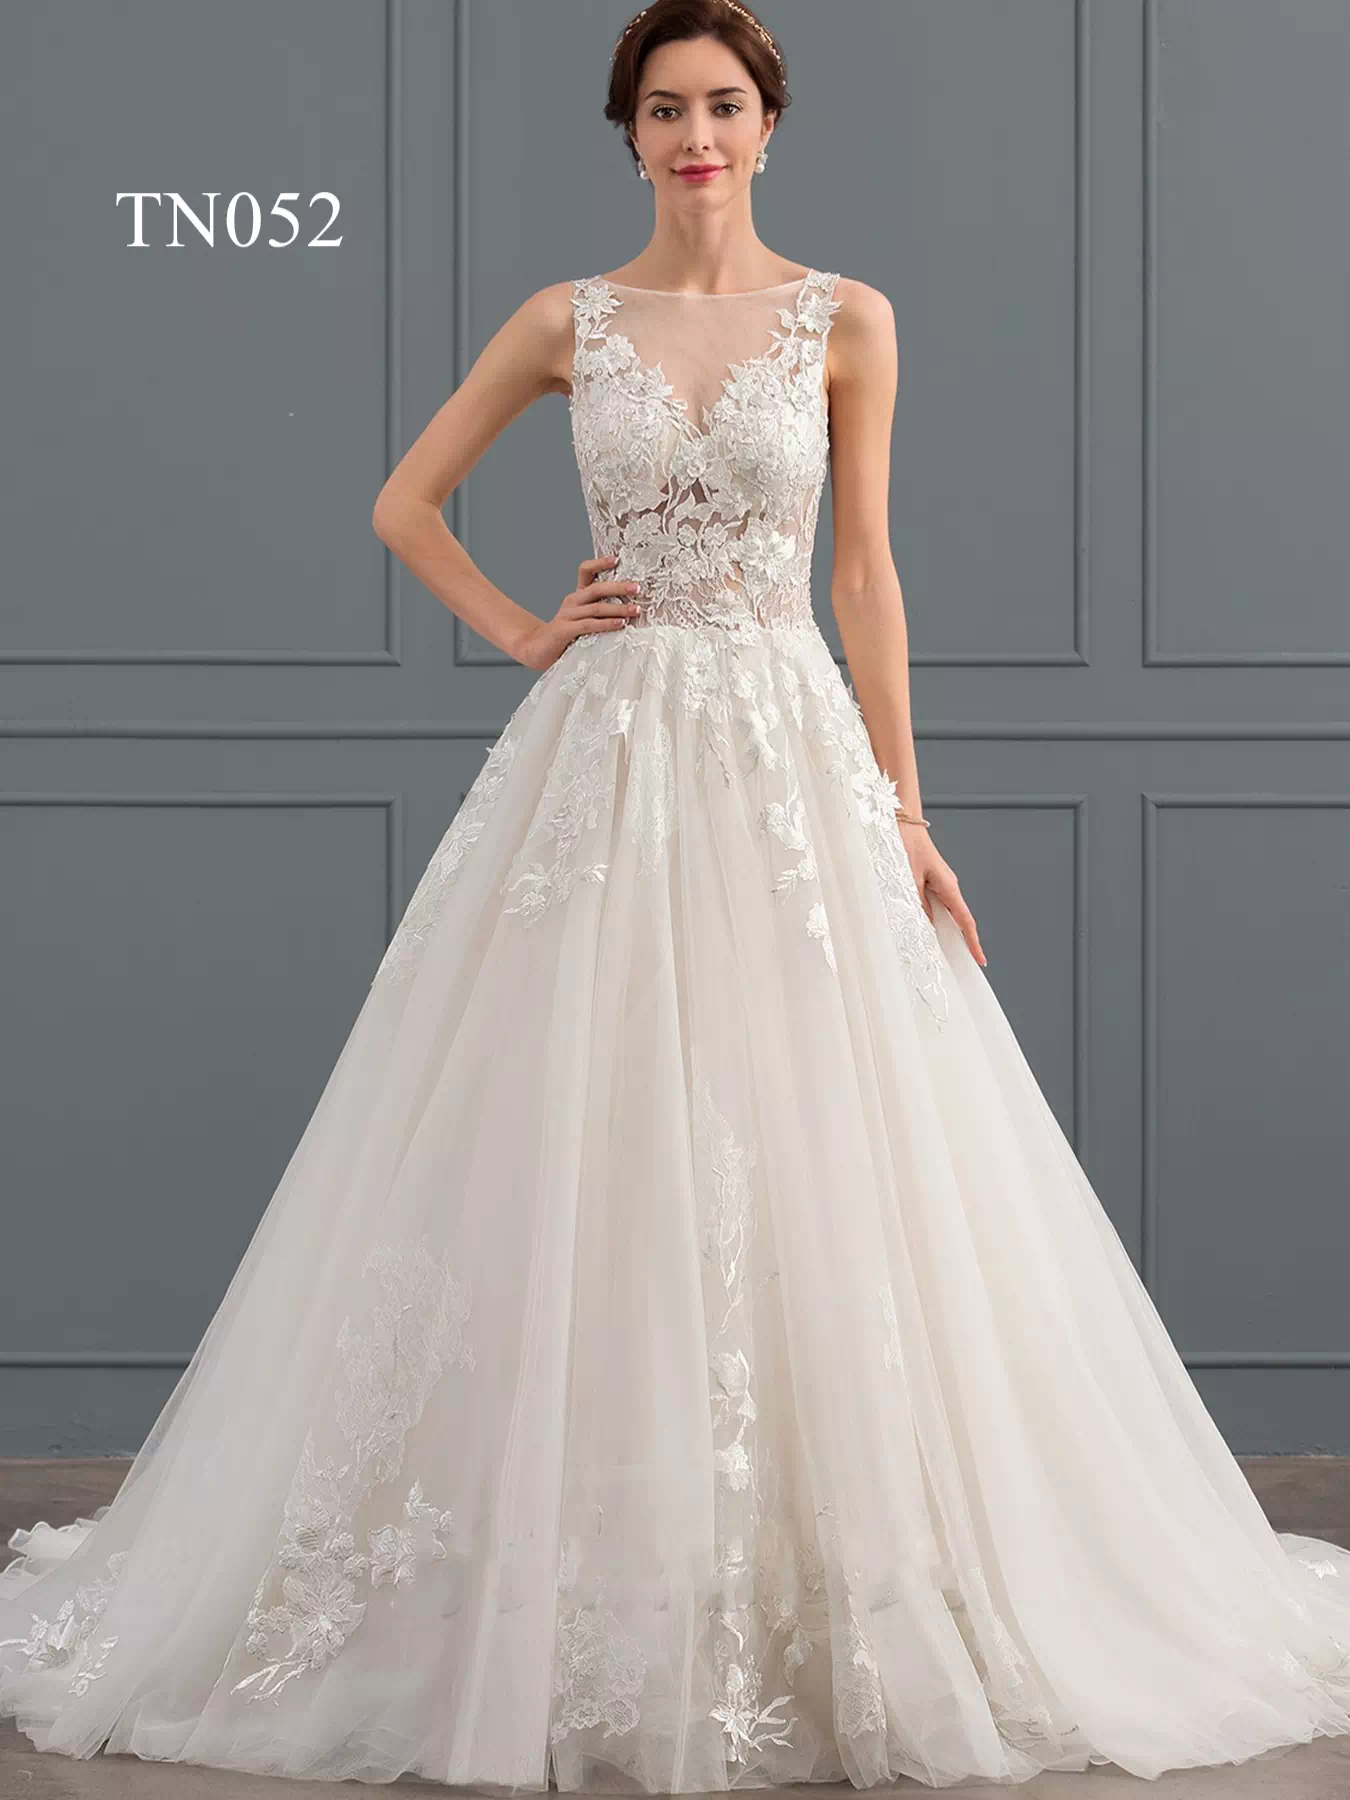 Sheer Illusion Ivory Lace Plunging Neck Tulle Wedding Dress - Princessly